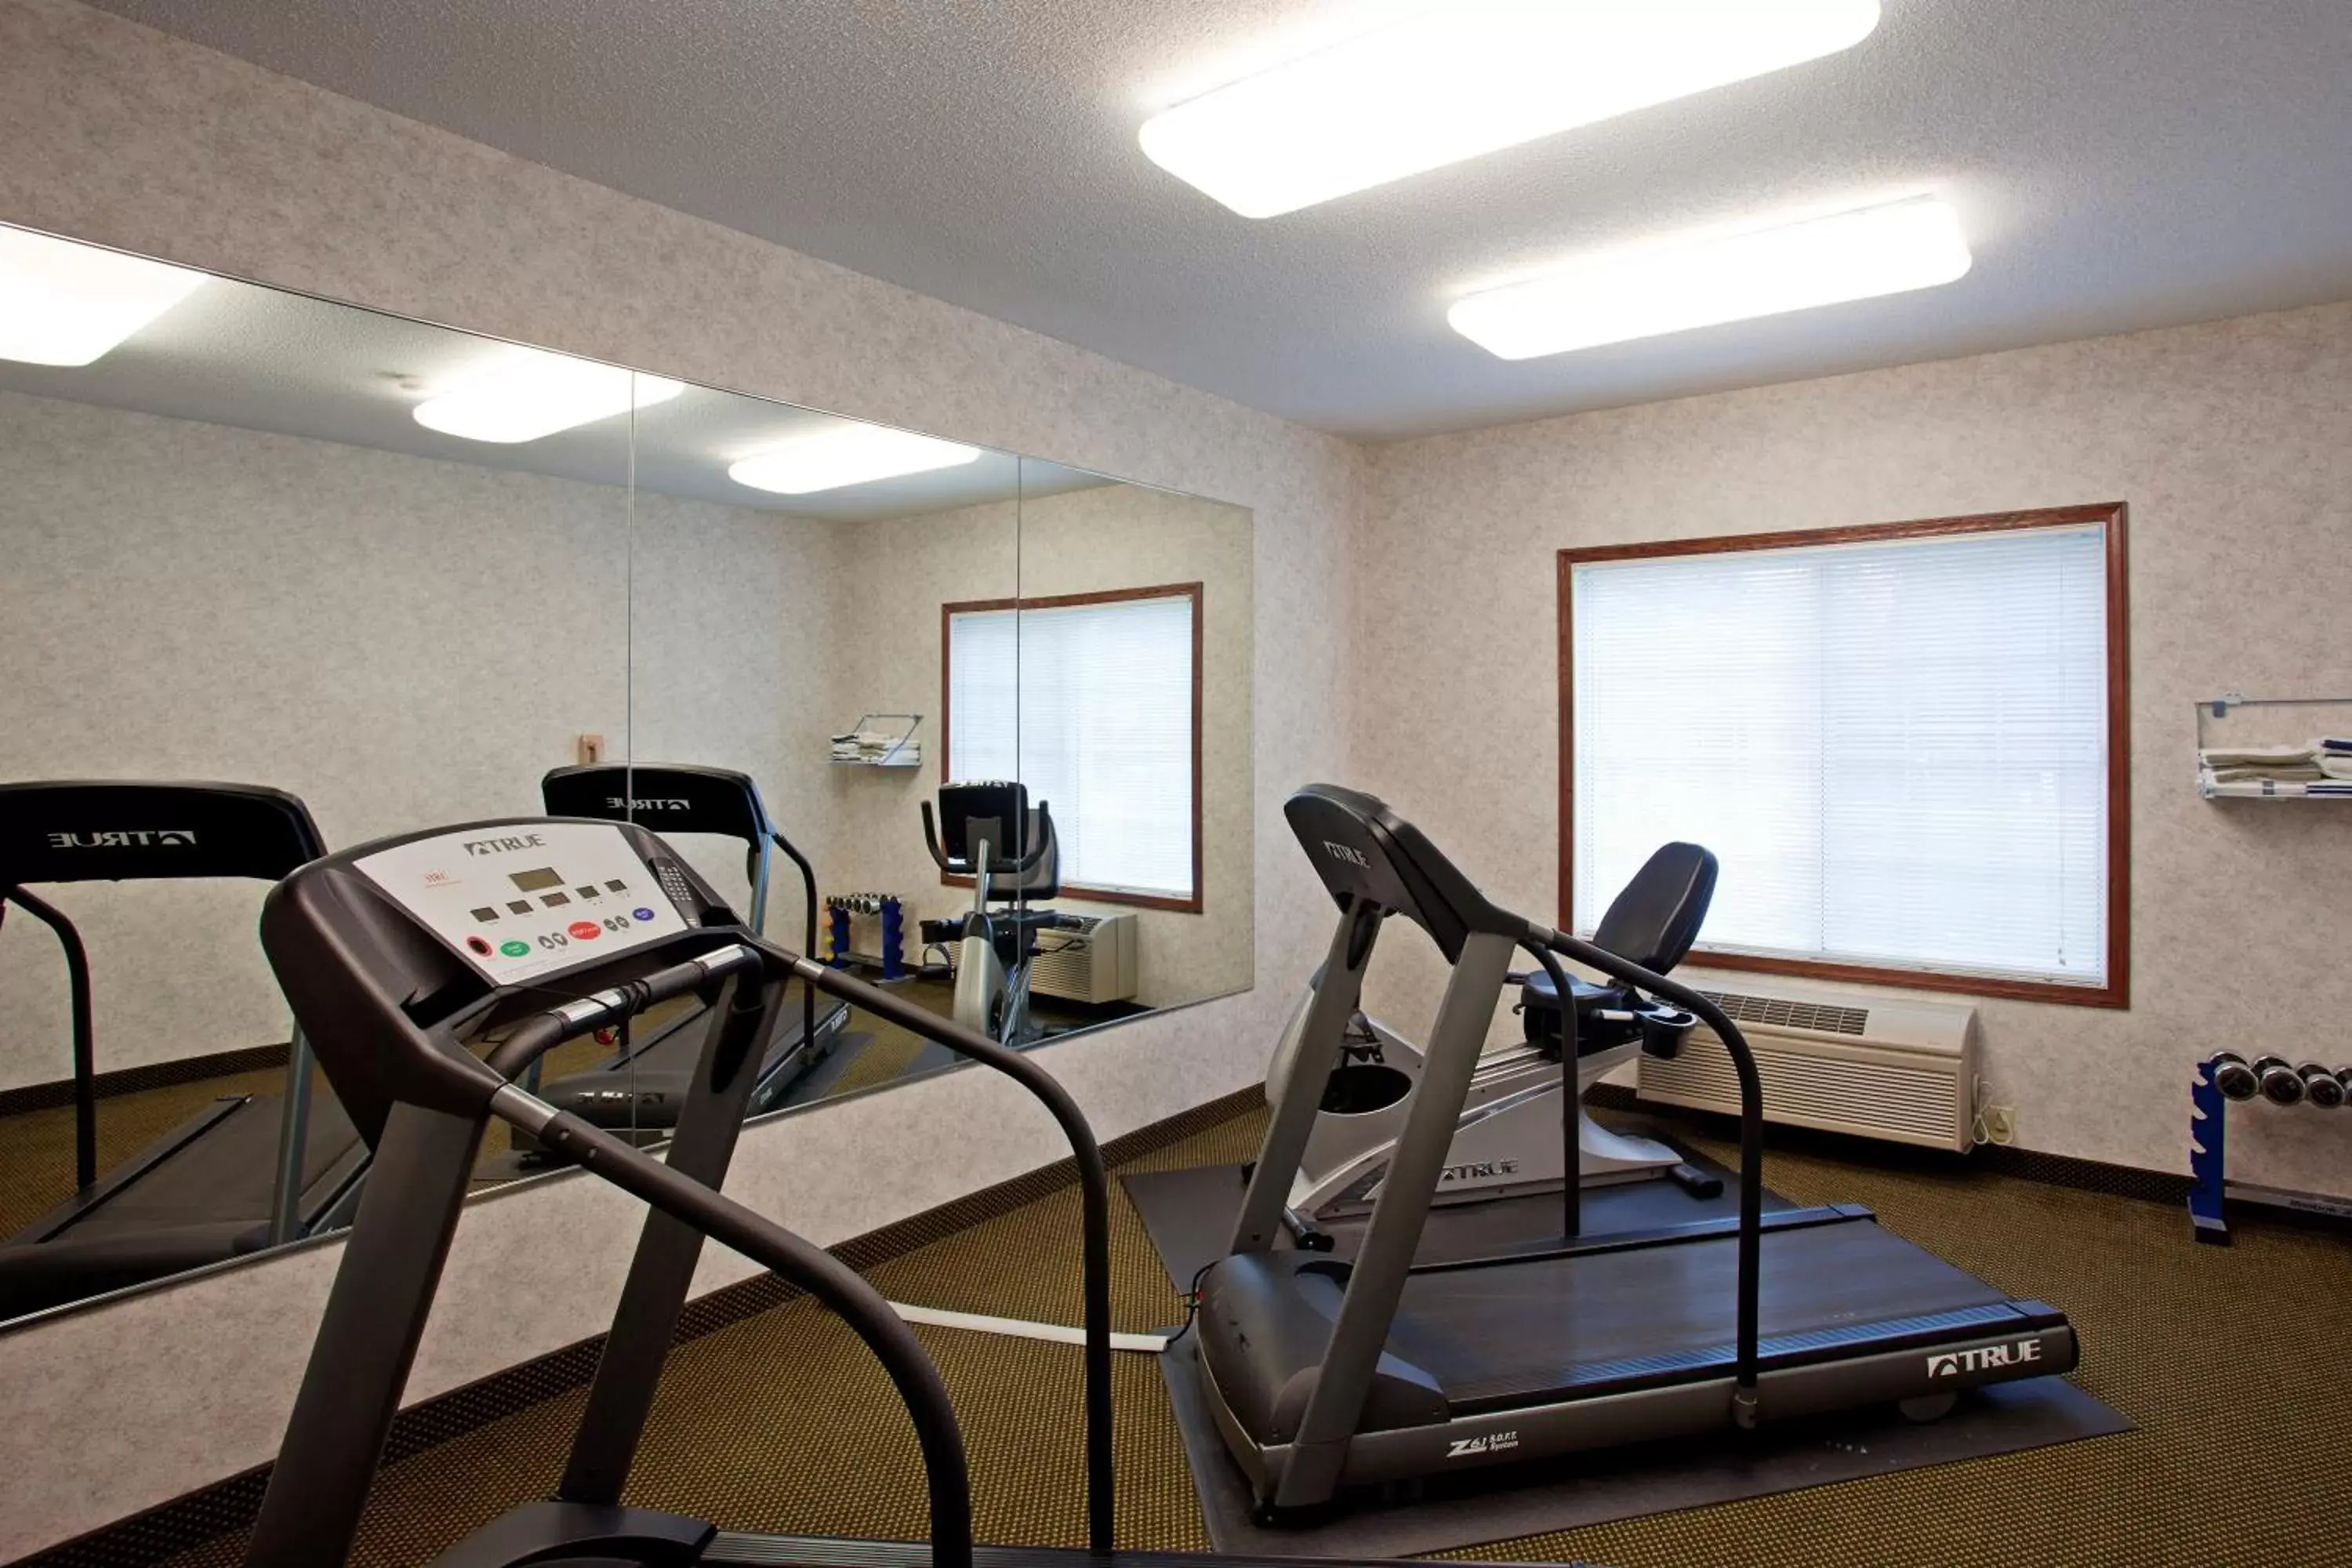 Fitness centre/facilities, Fitness Center/Facilities in Country Inn & Suites by Radisson, Elk River, MN